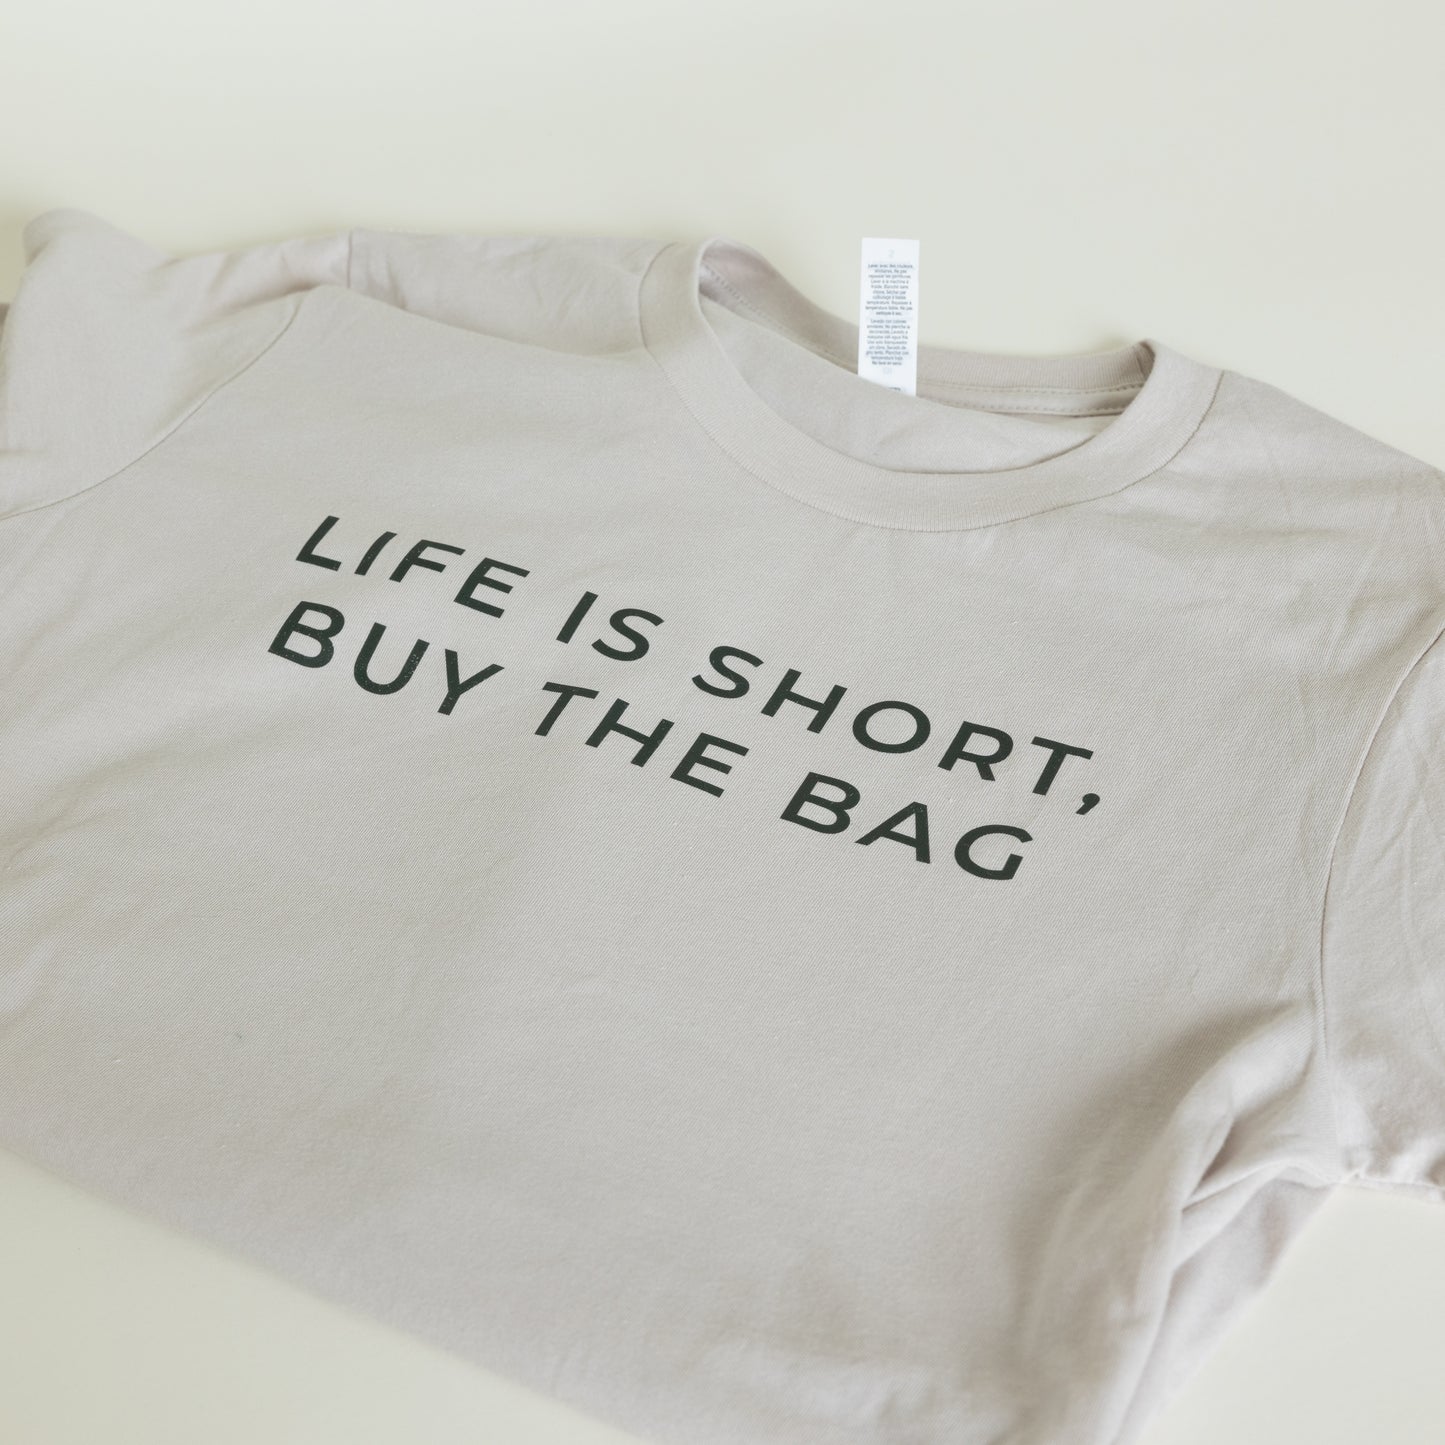 Life is Short, But the Bag T-Shirt